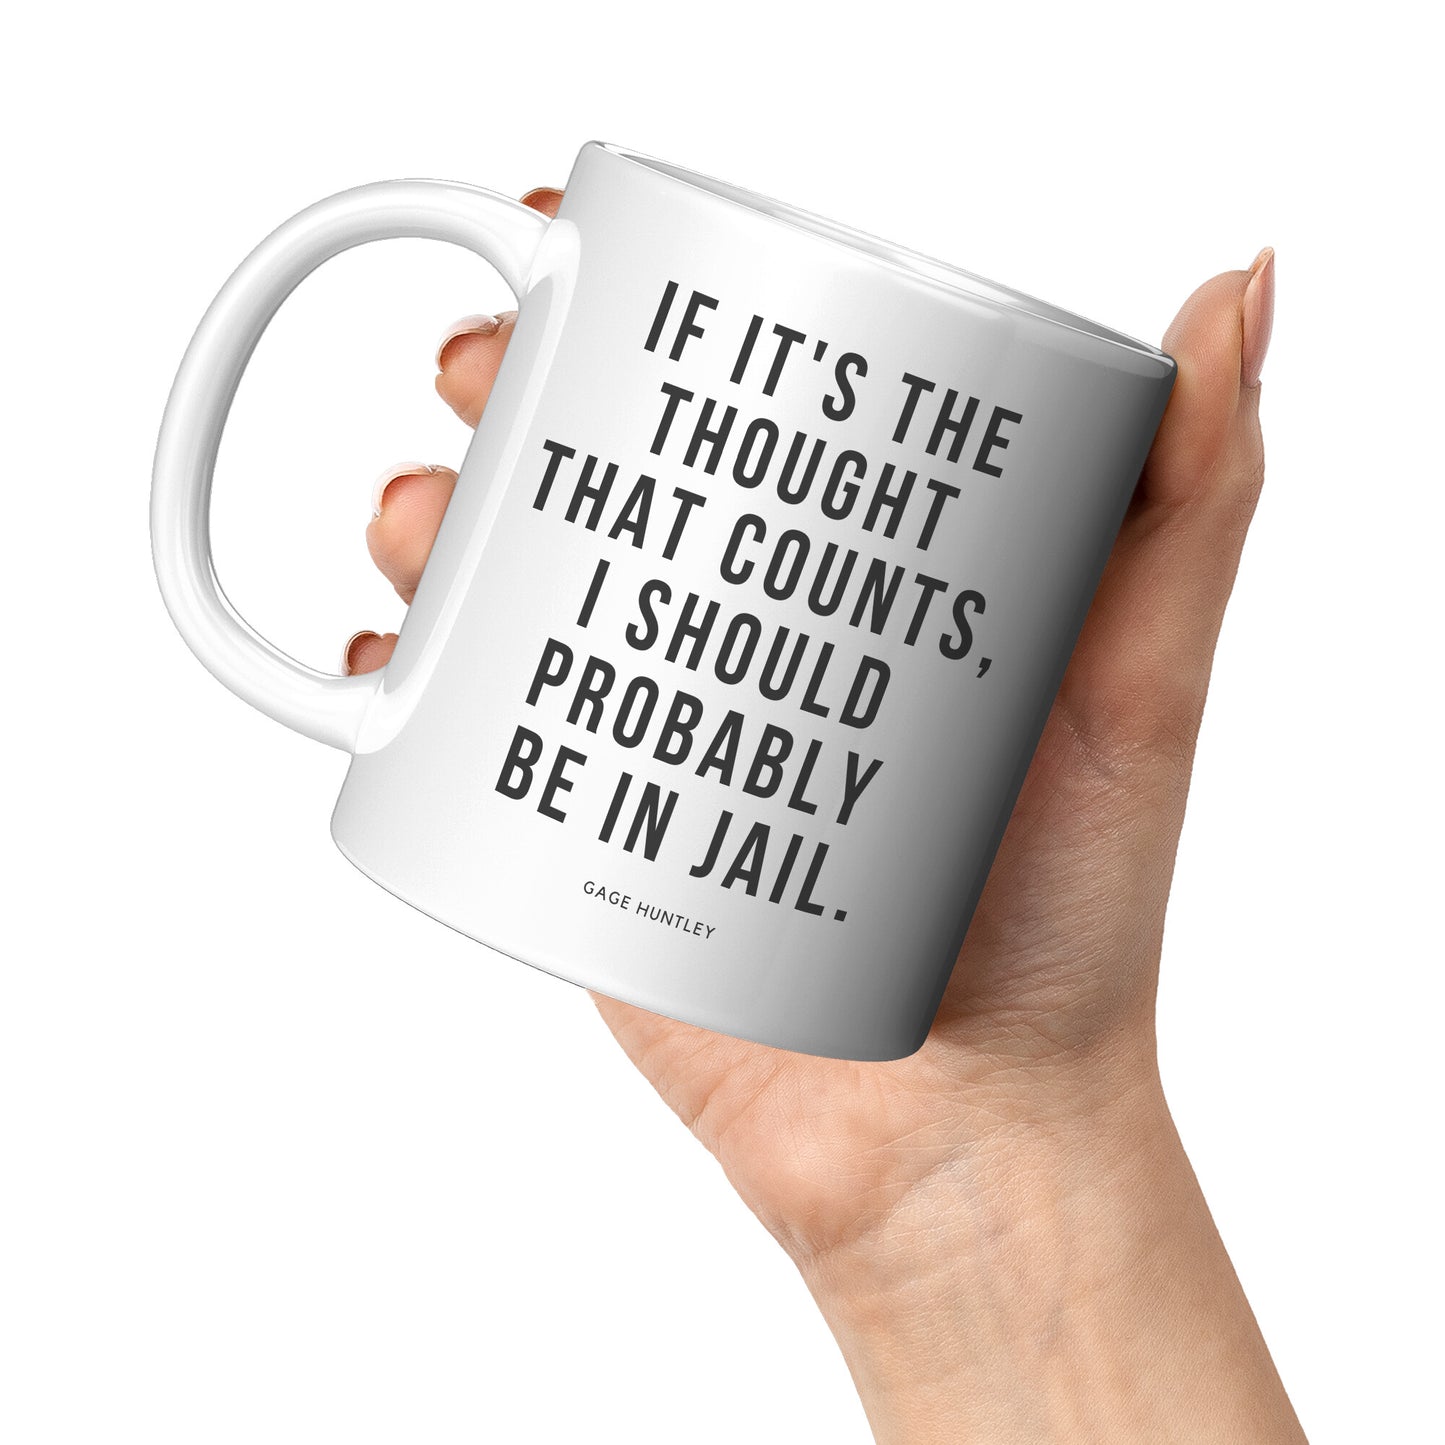 The Thought That Counts- Coffee Mug